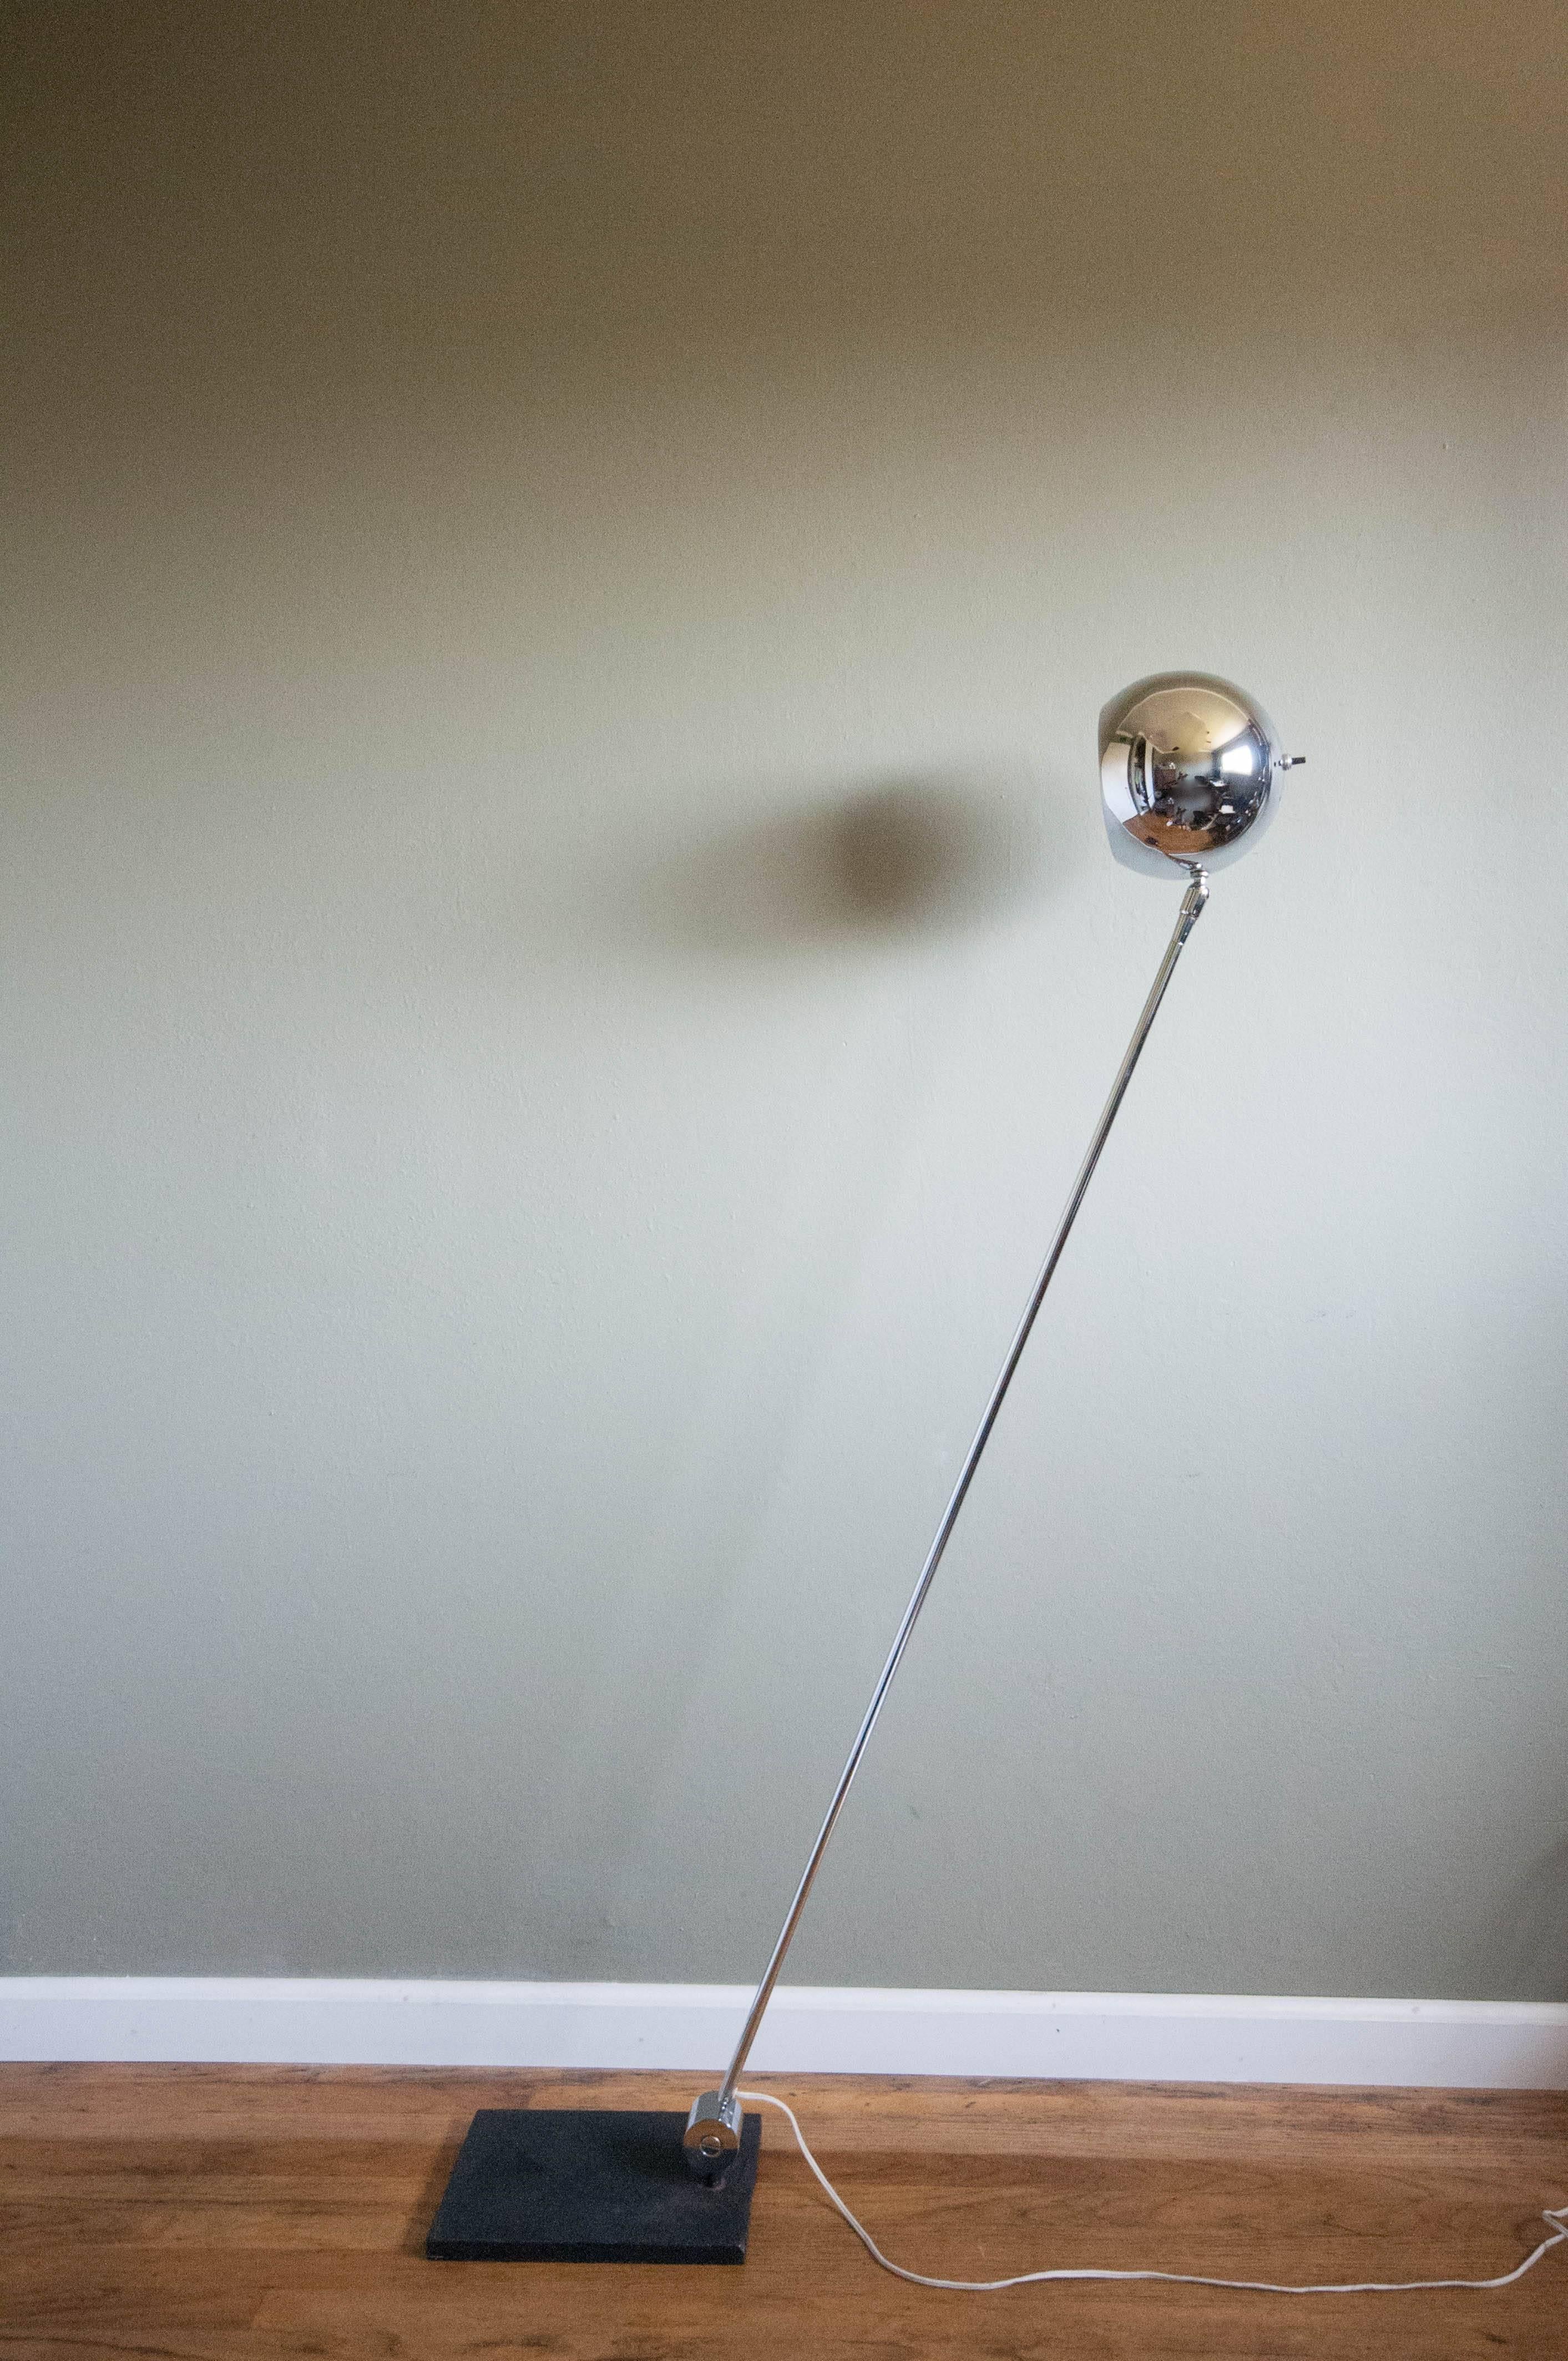 Mid Century Adjustable Floor Lamp designed by Robert Sonneman in polished chrome. This piece can be adjusted from the base and head tilts up and down.

